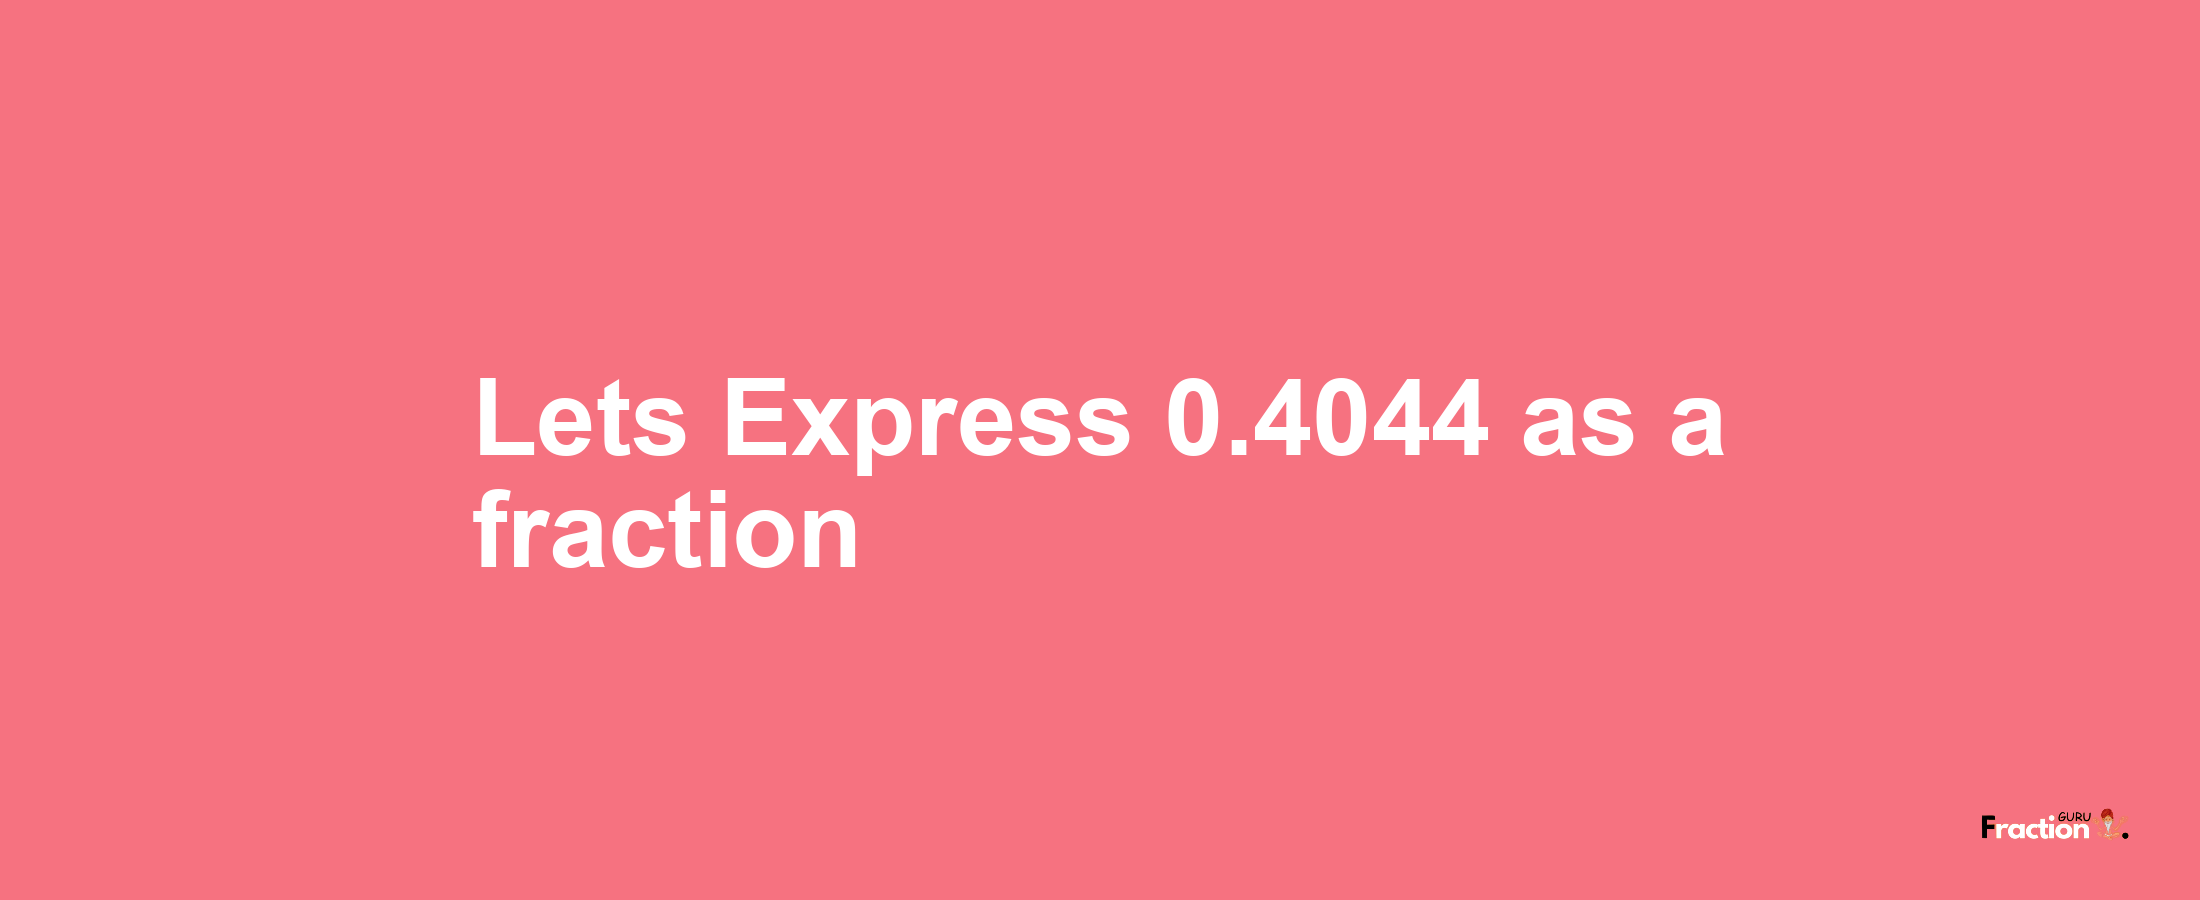 Lets Express 0.4044 as afraction